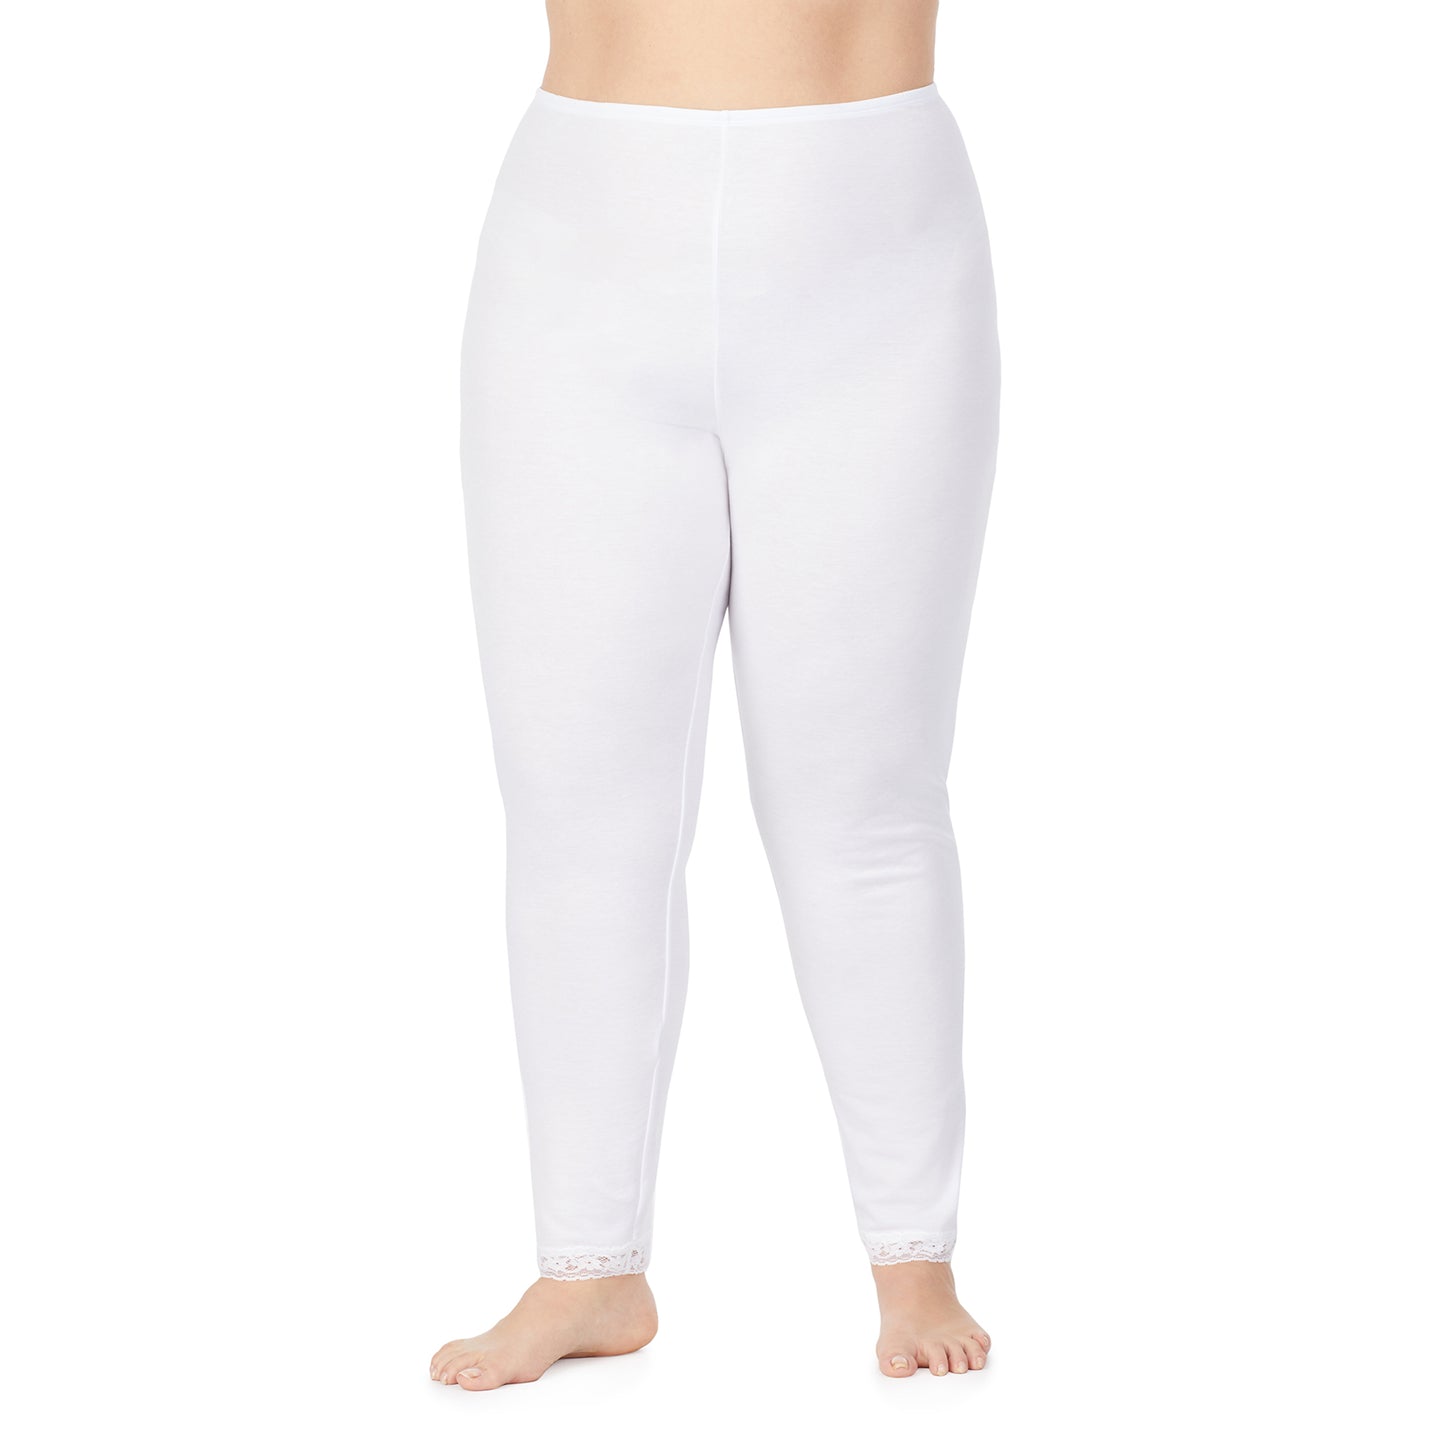 White; Model is wearing size 1X. She is 5'9", Bust 38", Waist 36", Hips 48.5".@A lady wearing a white lace edge legging plus.